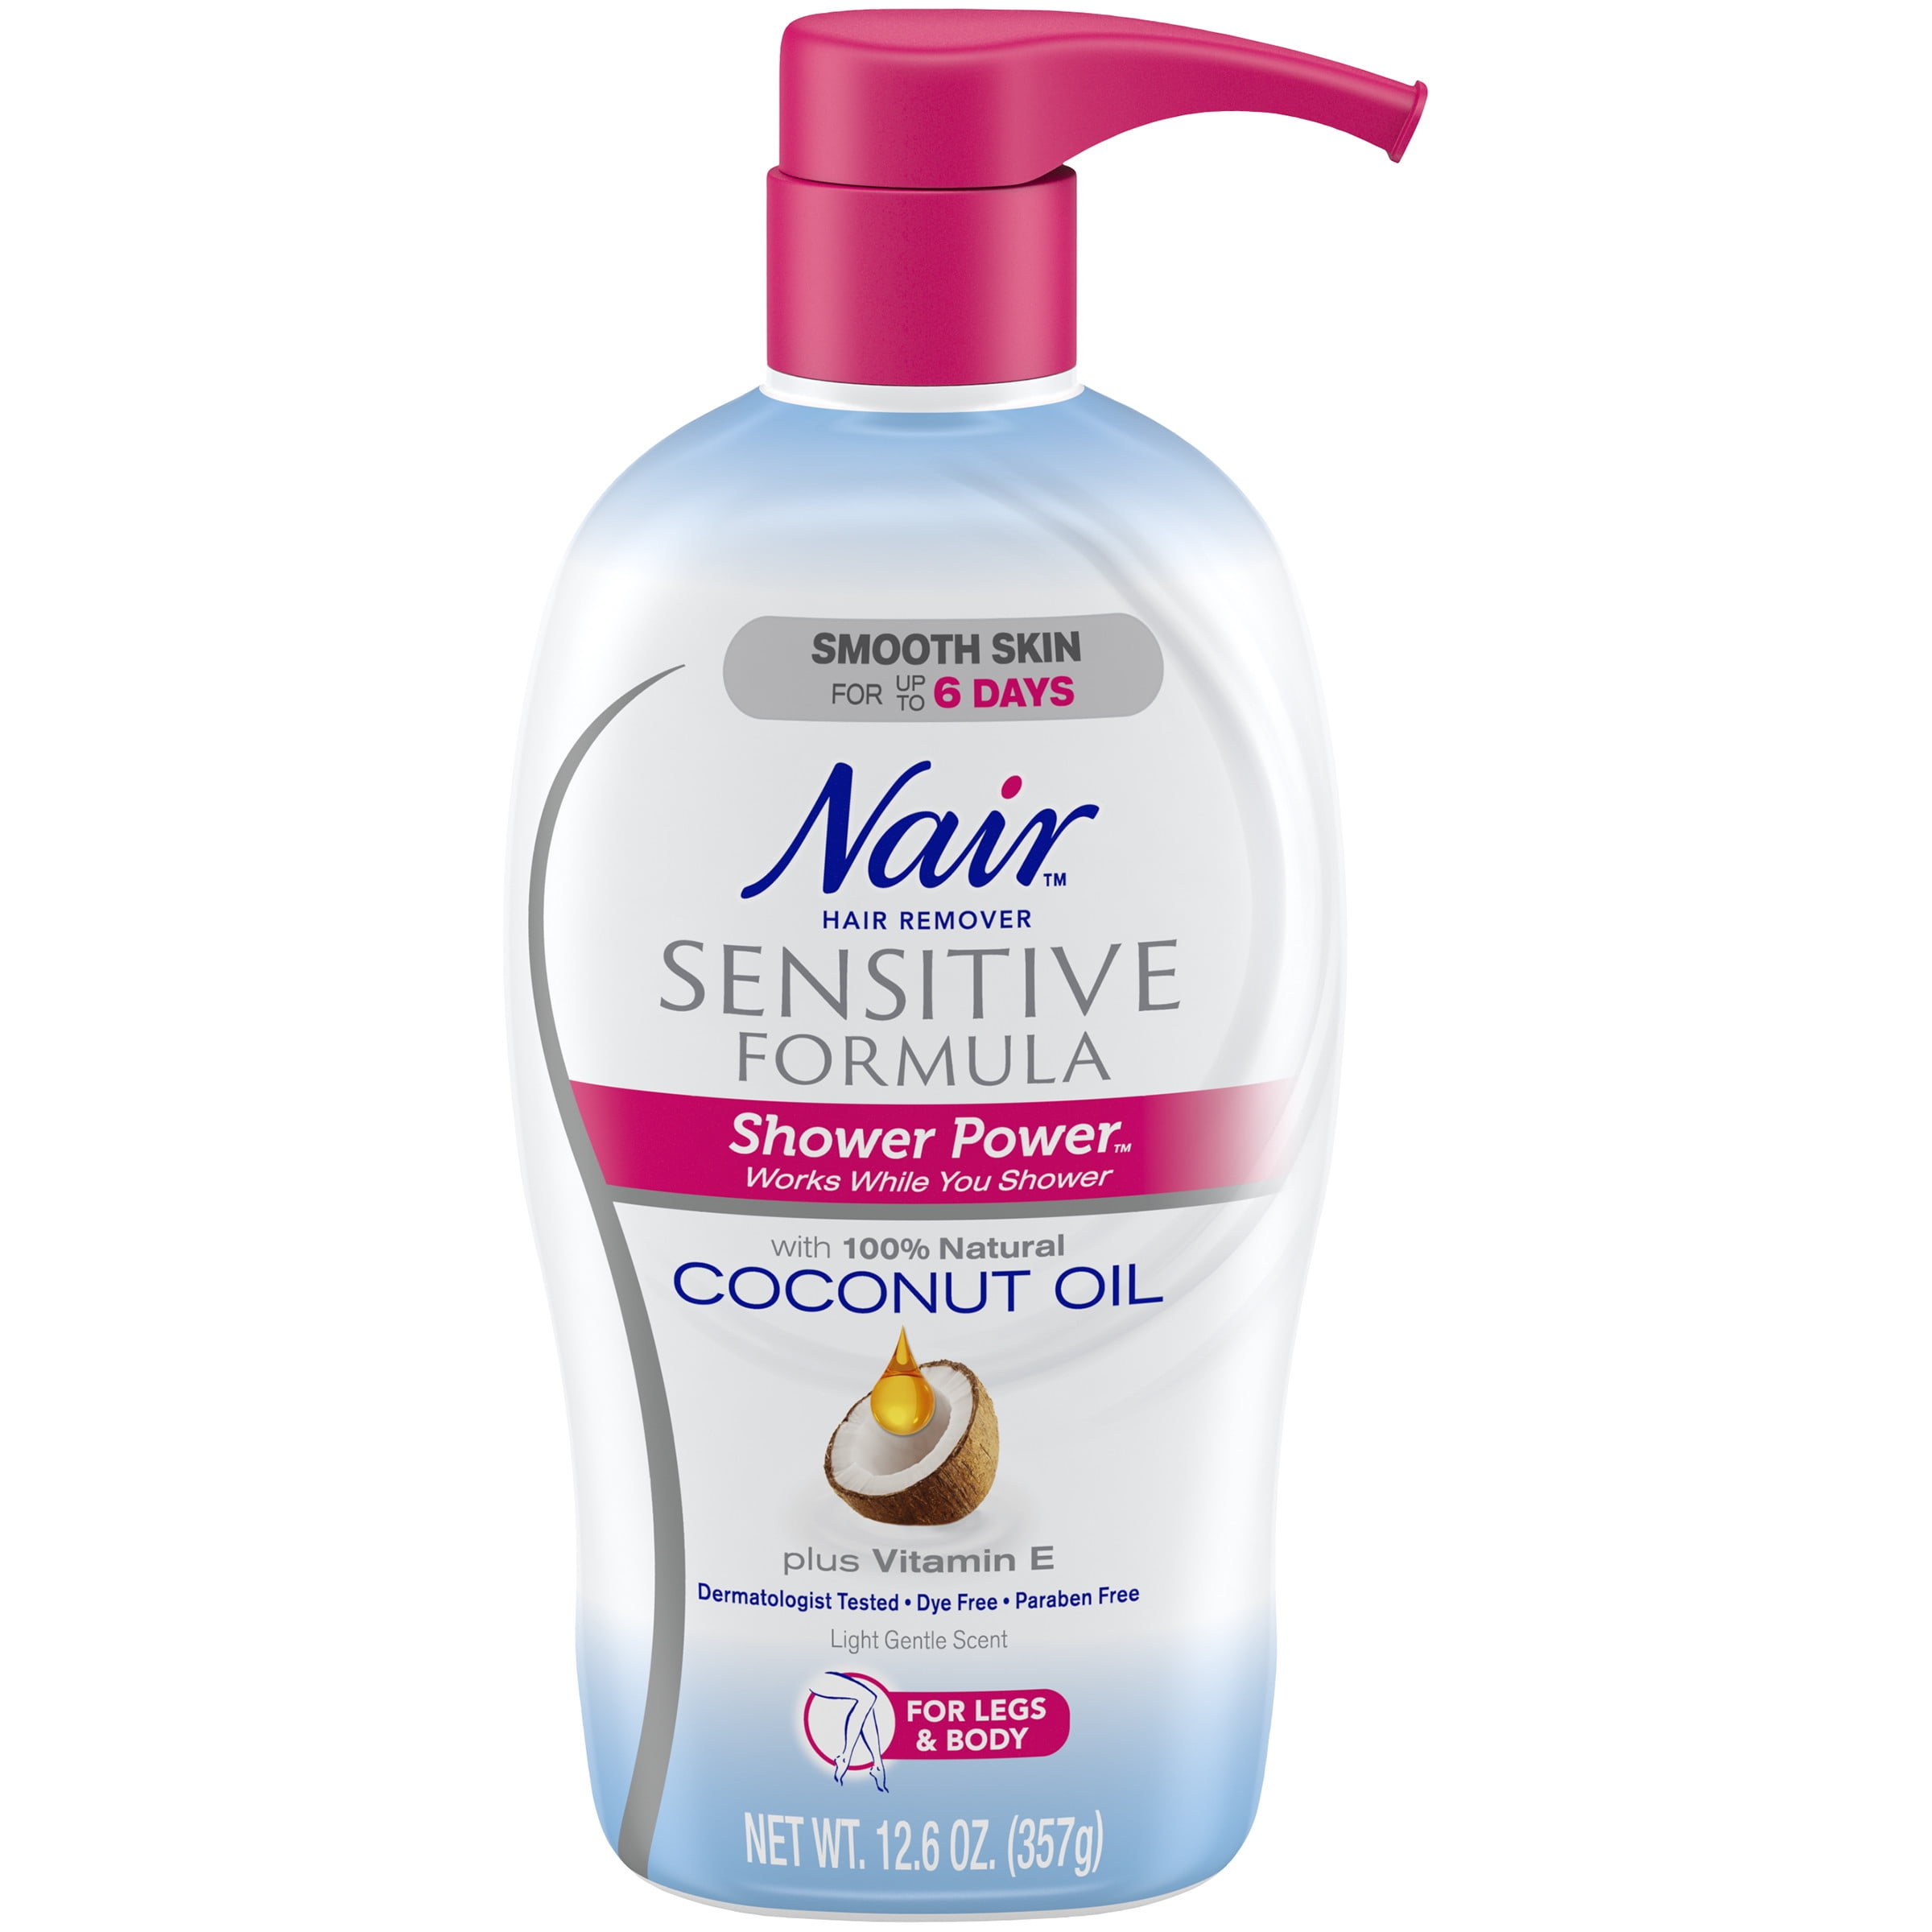 Nair Hair Remover Sensitive Formula Shower Power with Coconut Oil and  Vitamin E,  